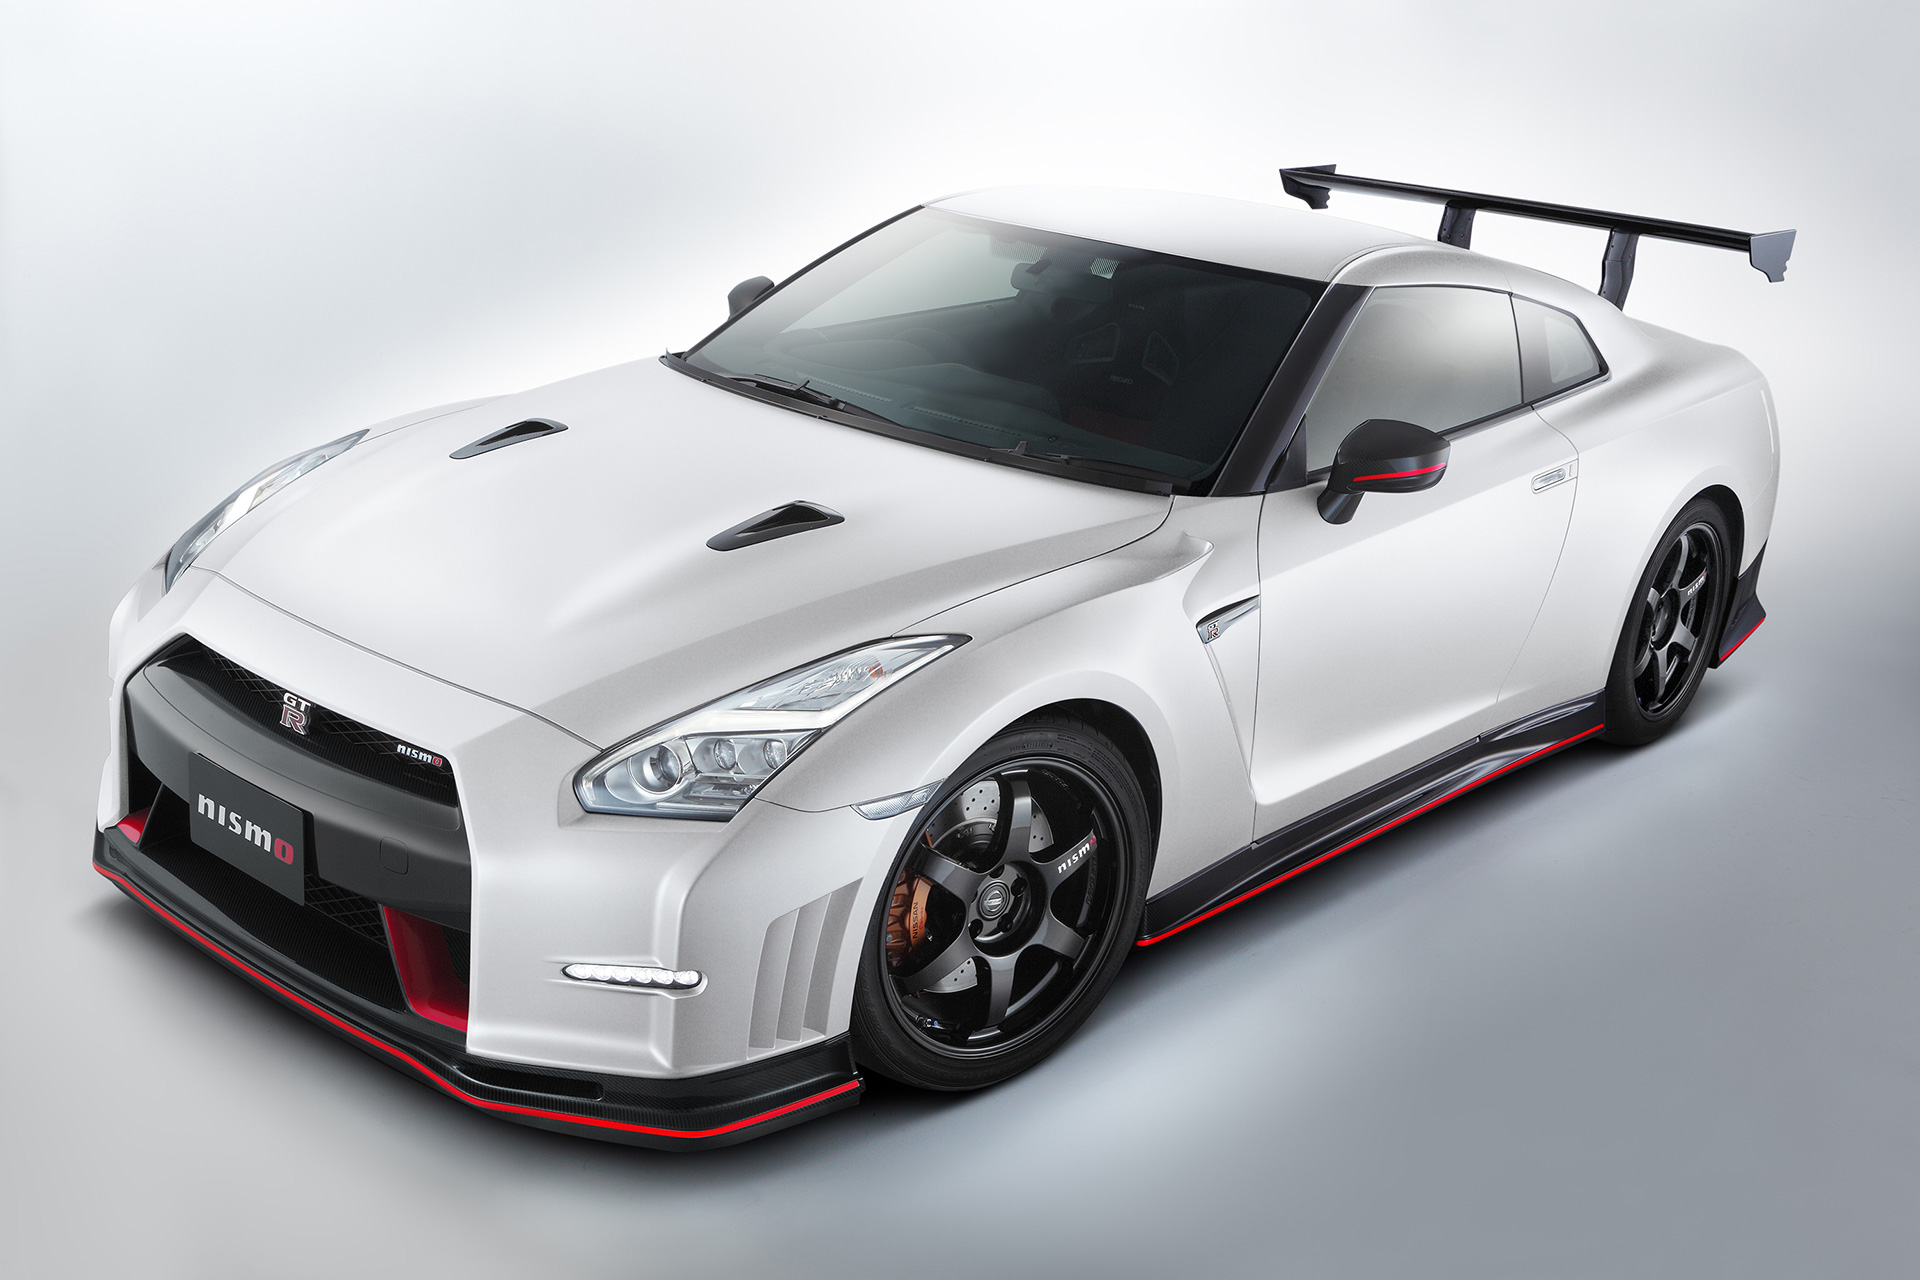 Nissan GT-R NISMO 2016 N-Attack - avant / front